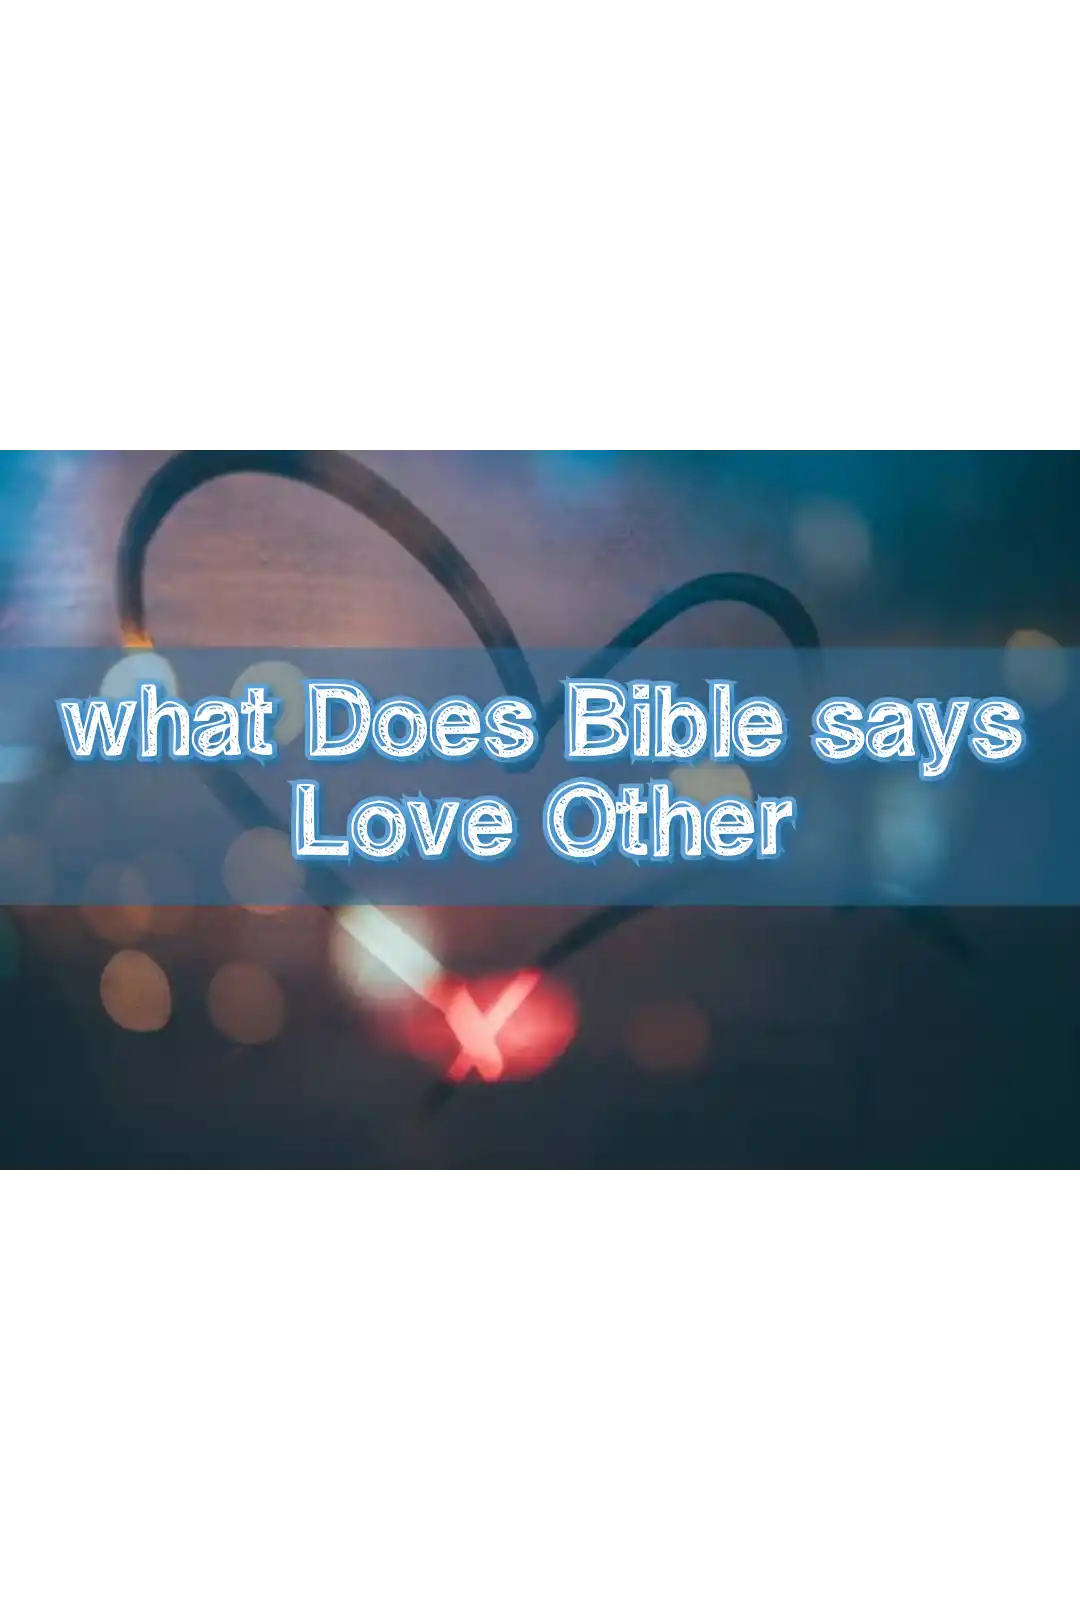 WHAT DOES BIBLE SAY LOVE OTHER